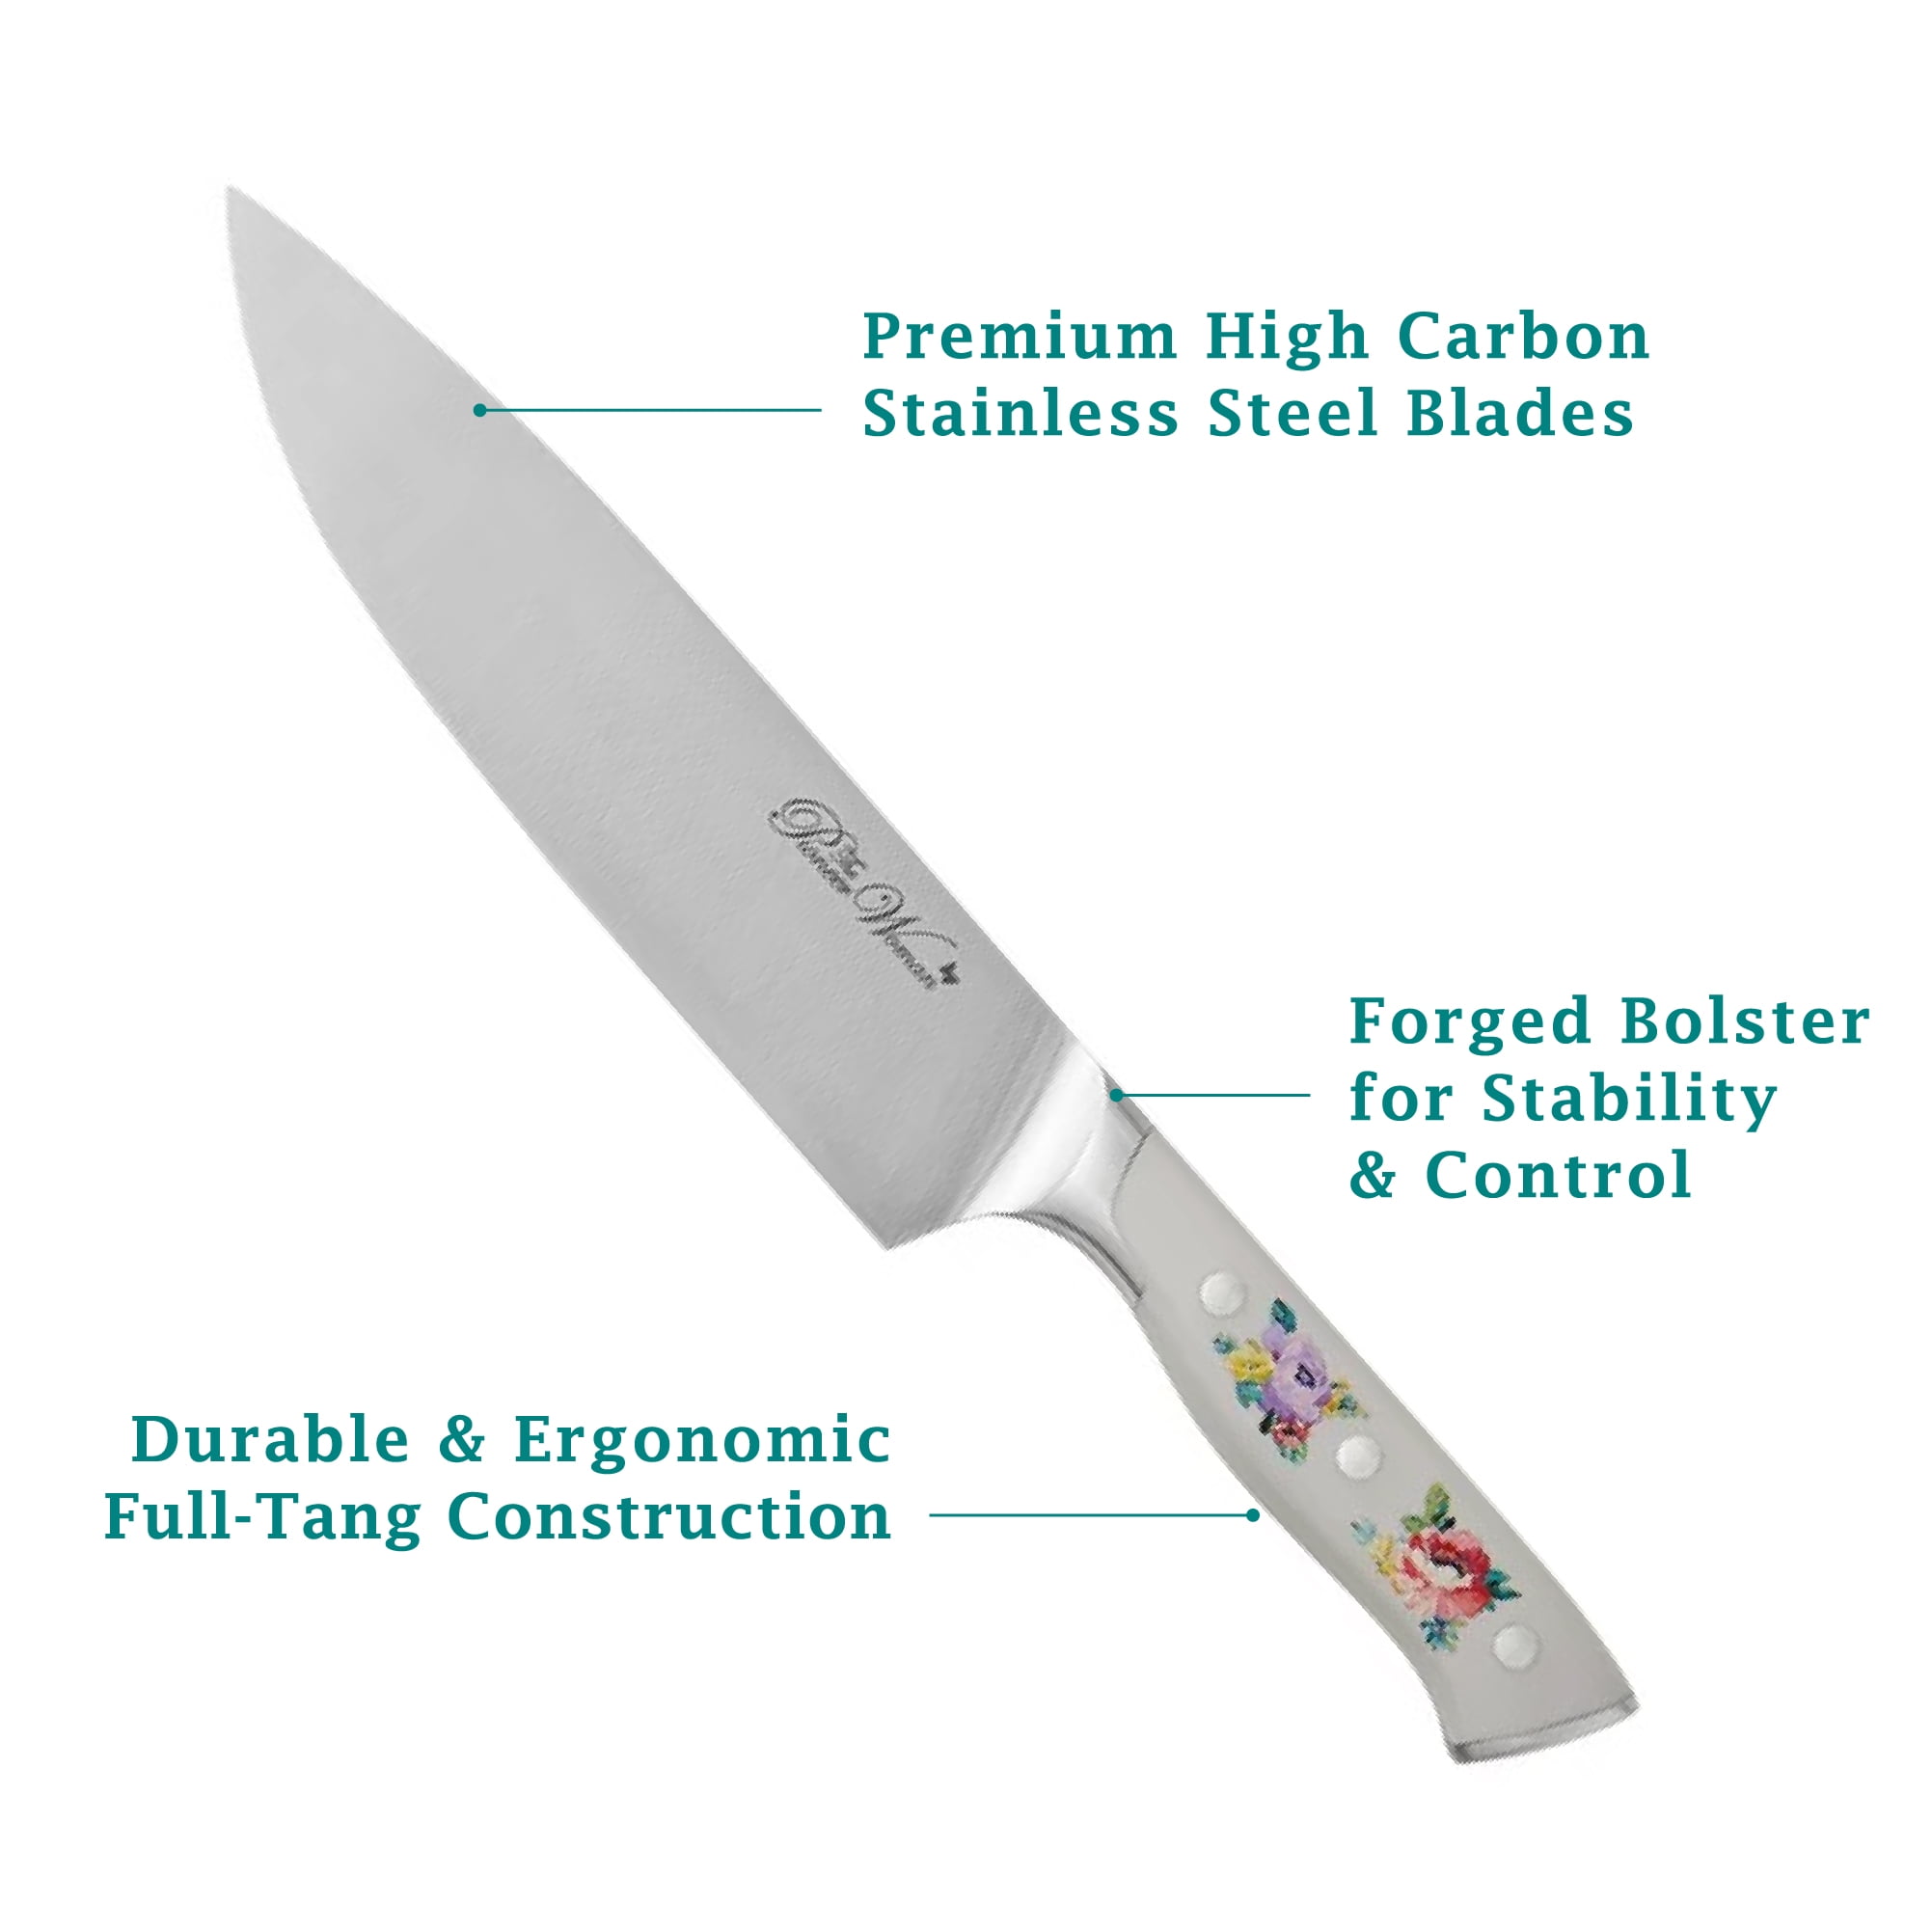 The Pioneer Woman Pioneer Signature 14-Piece Stainless Steel Knife